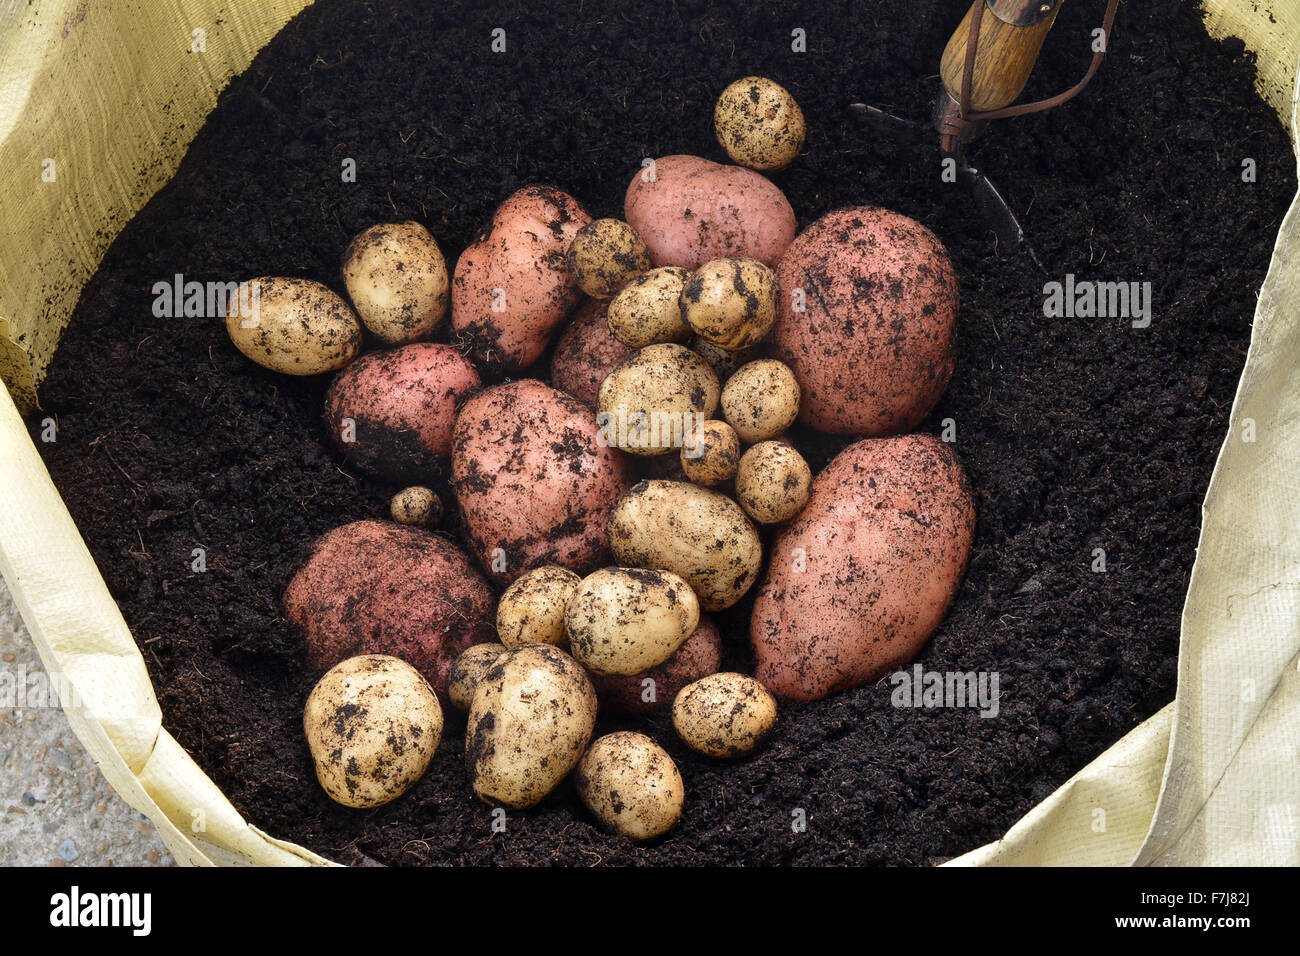 Freshly lifted unwashed organic red and white potatoes home grown in a garden from a grow bag in dark rich soil, showing a small Stock Photo